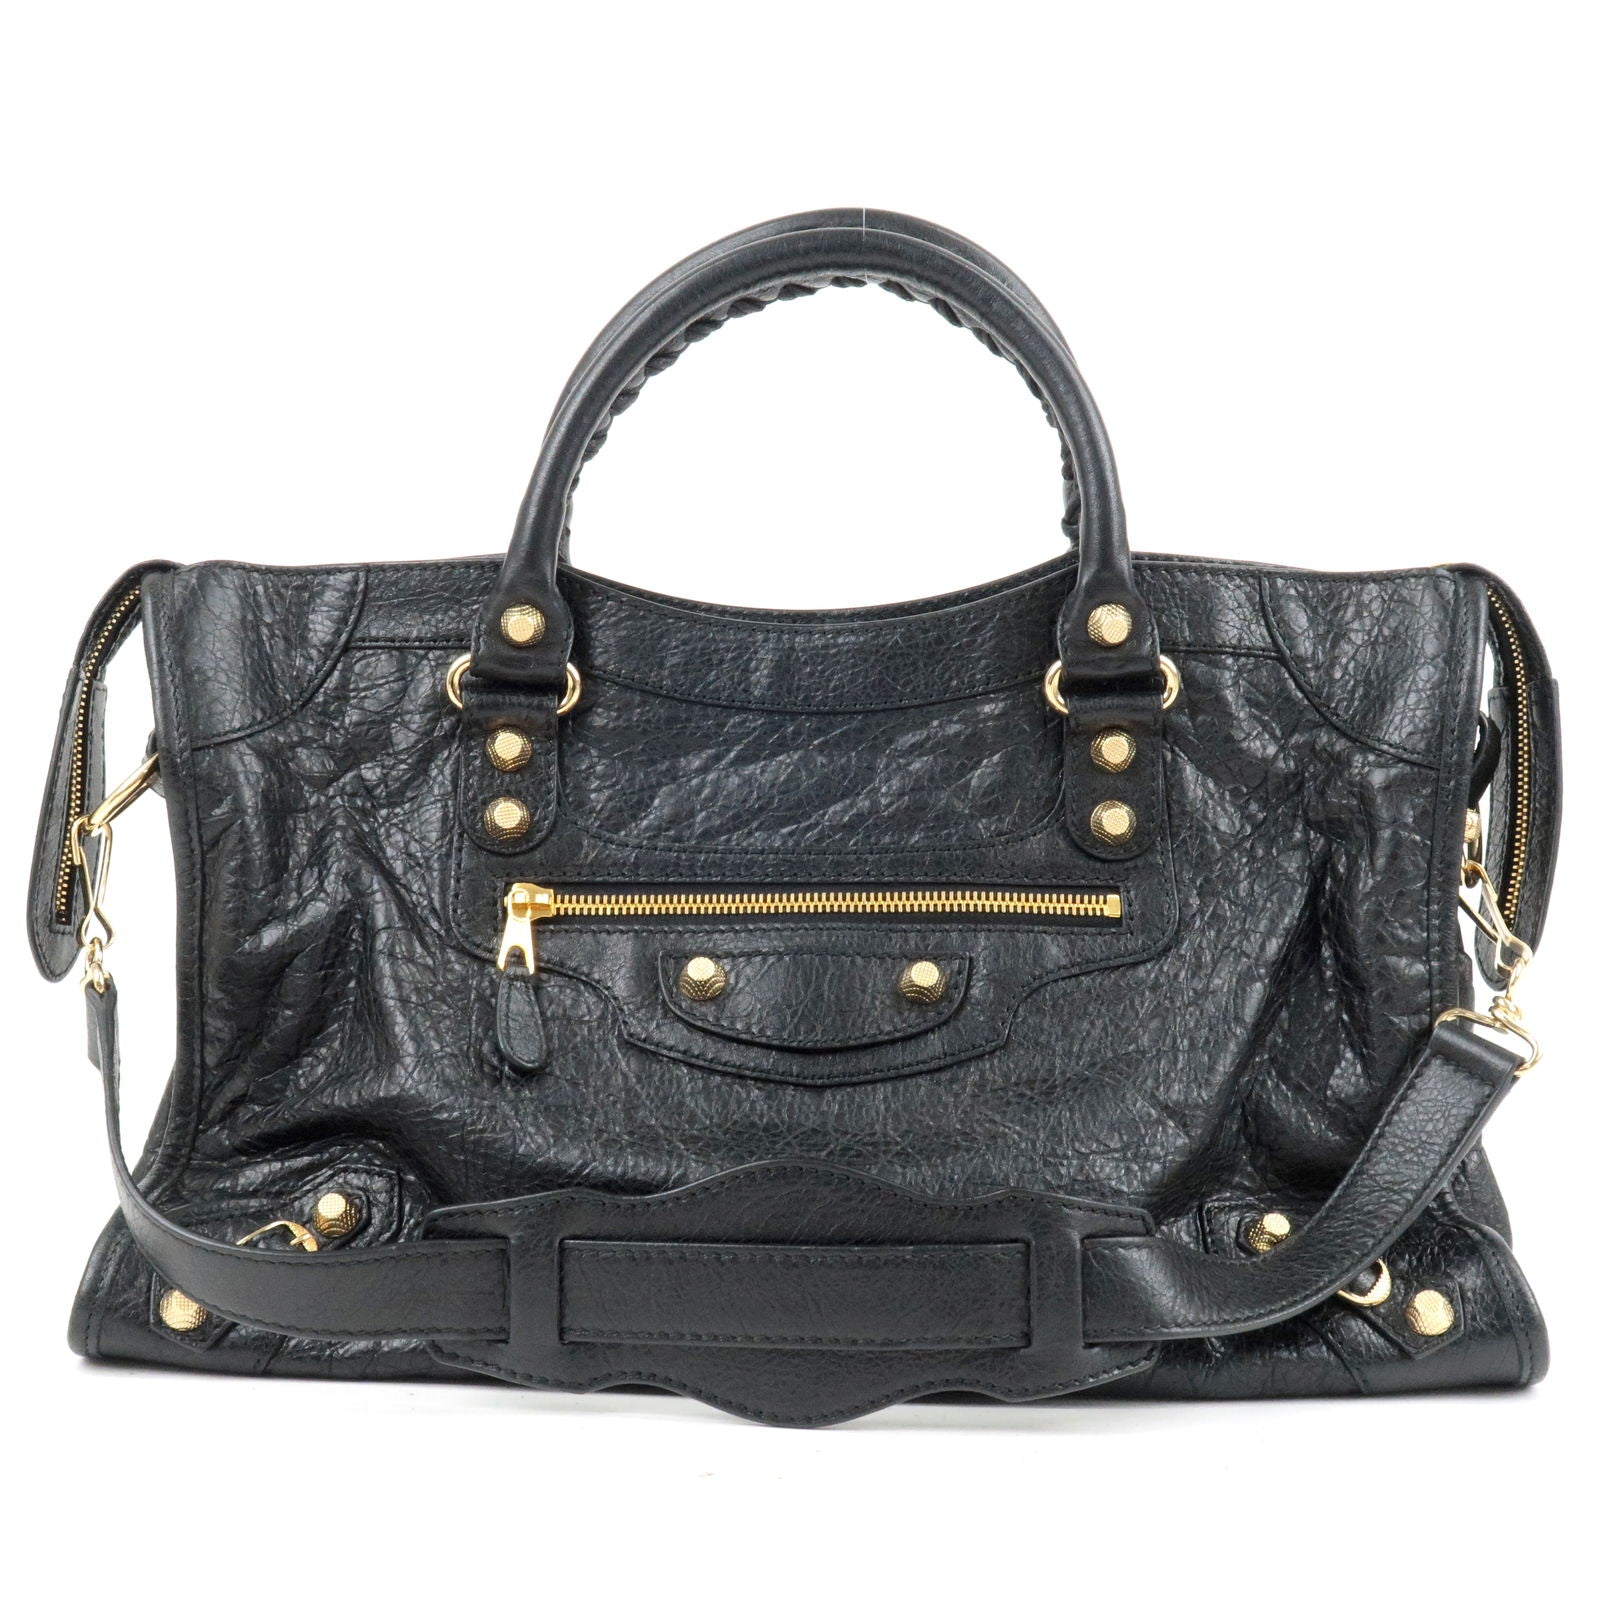 2Way - Hand - Giant - BALENCIAGA - Leather - 281770 – dct - quilted spike-stud lambskin bag - Bag - Bag - City - ep_vintage luxury - The - Black